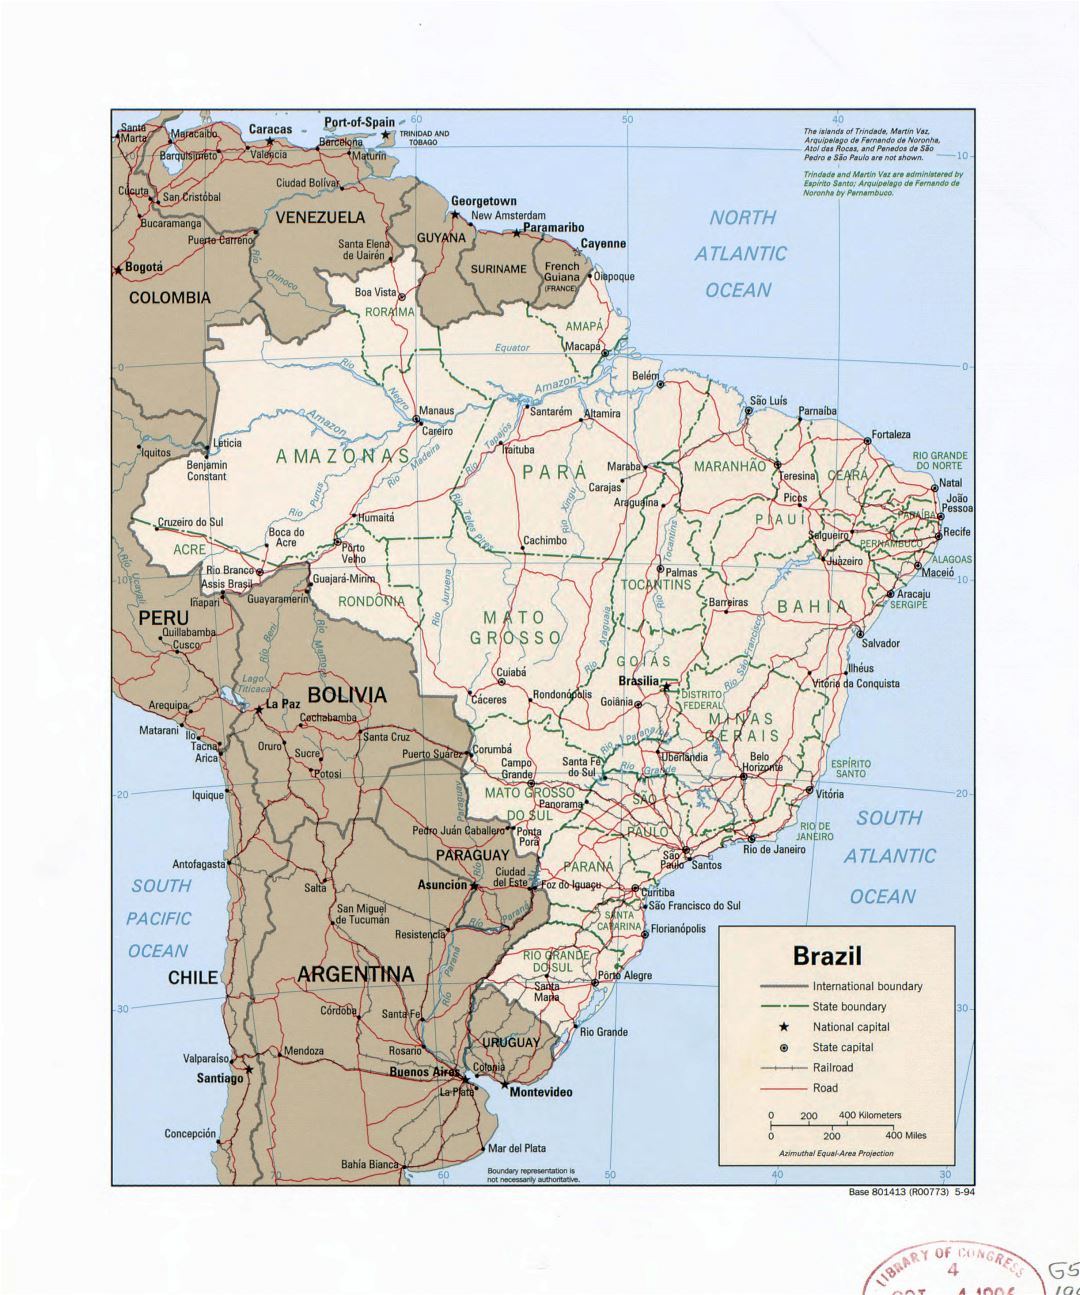 Large detail political and administrative map of Brazil with rivers, roads, railroads and major cities - 1994